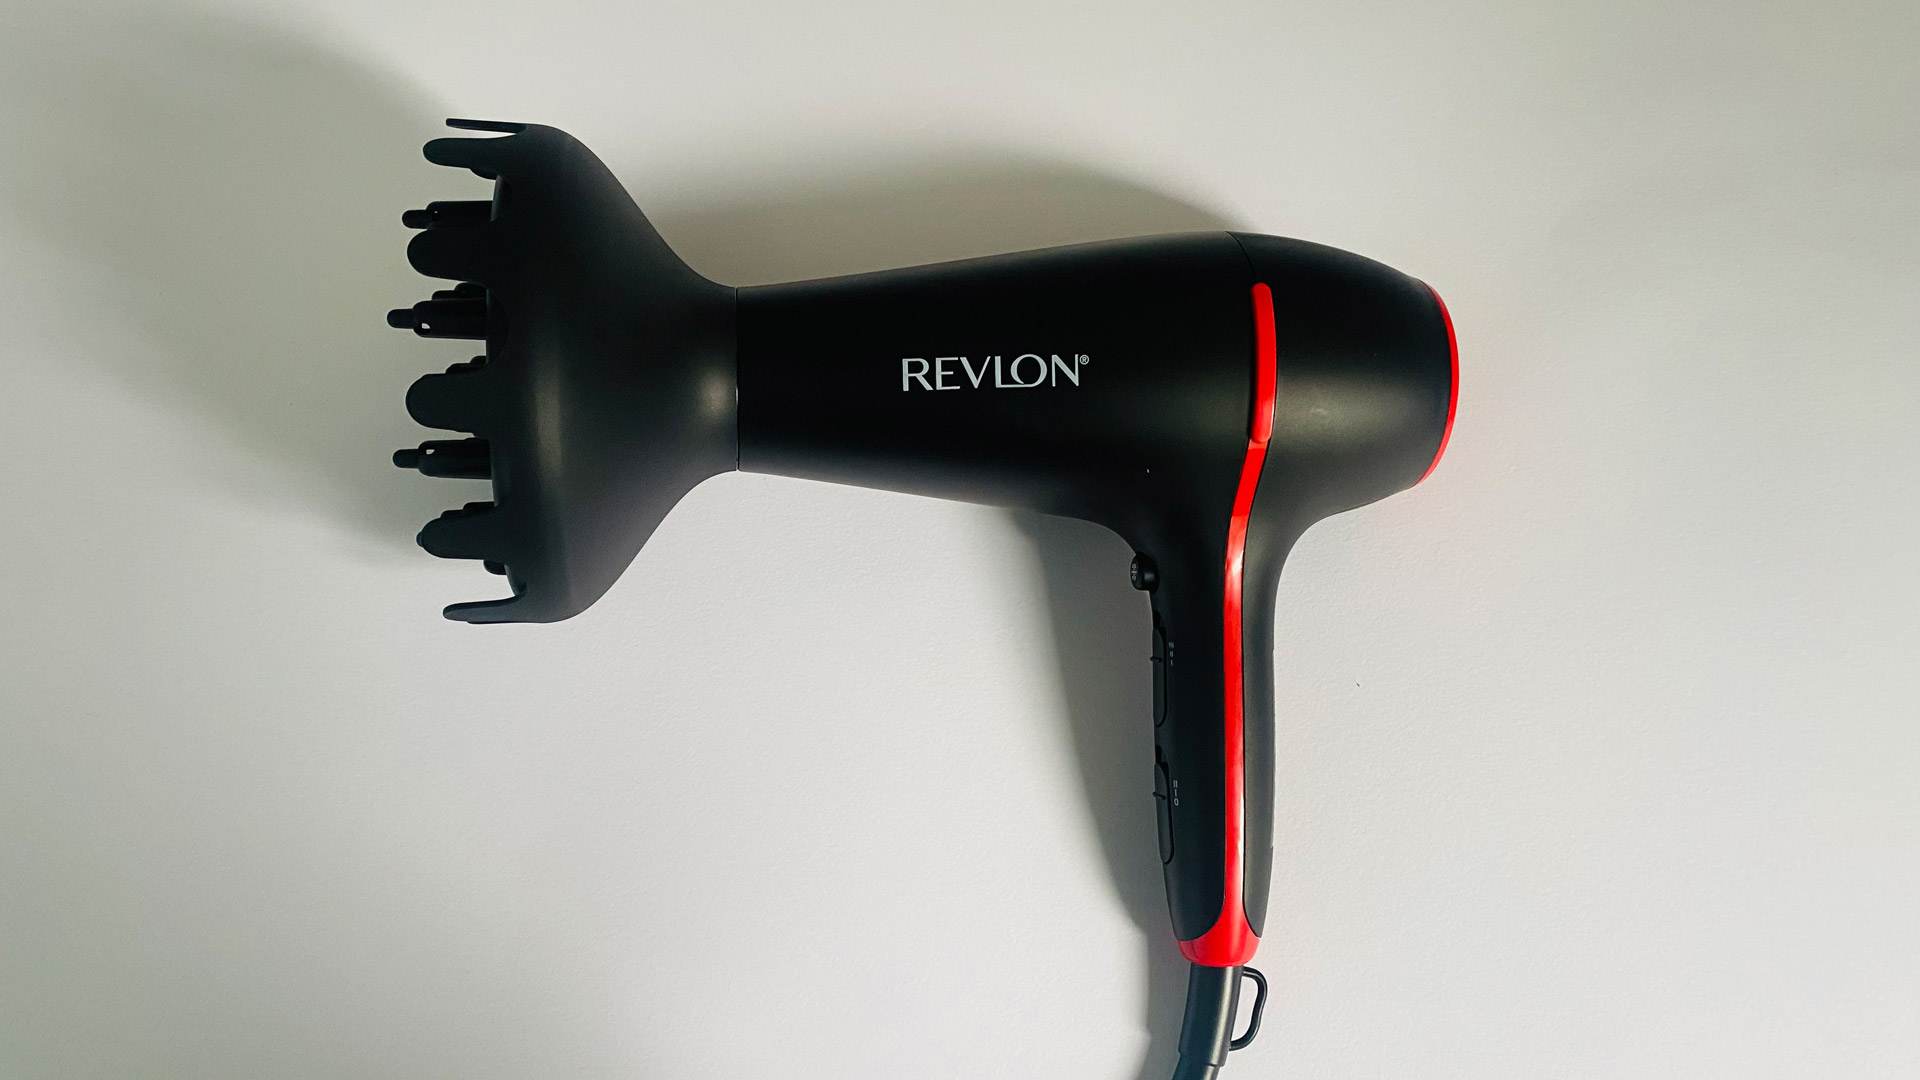 Revlon SmoothStay Coconut-Oil Infused Hair Dryer with diffuser attachment